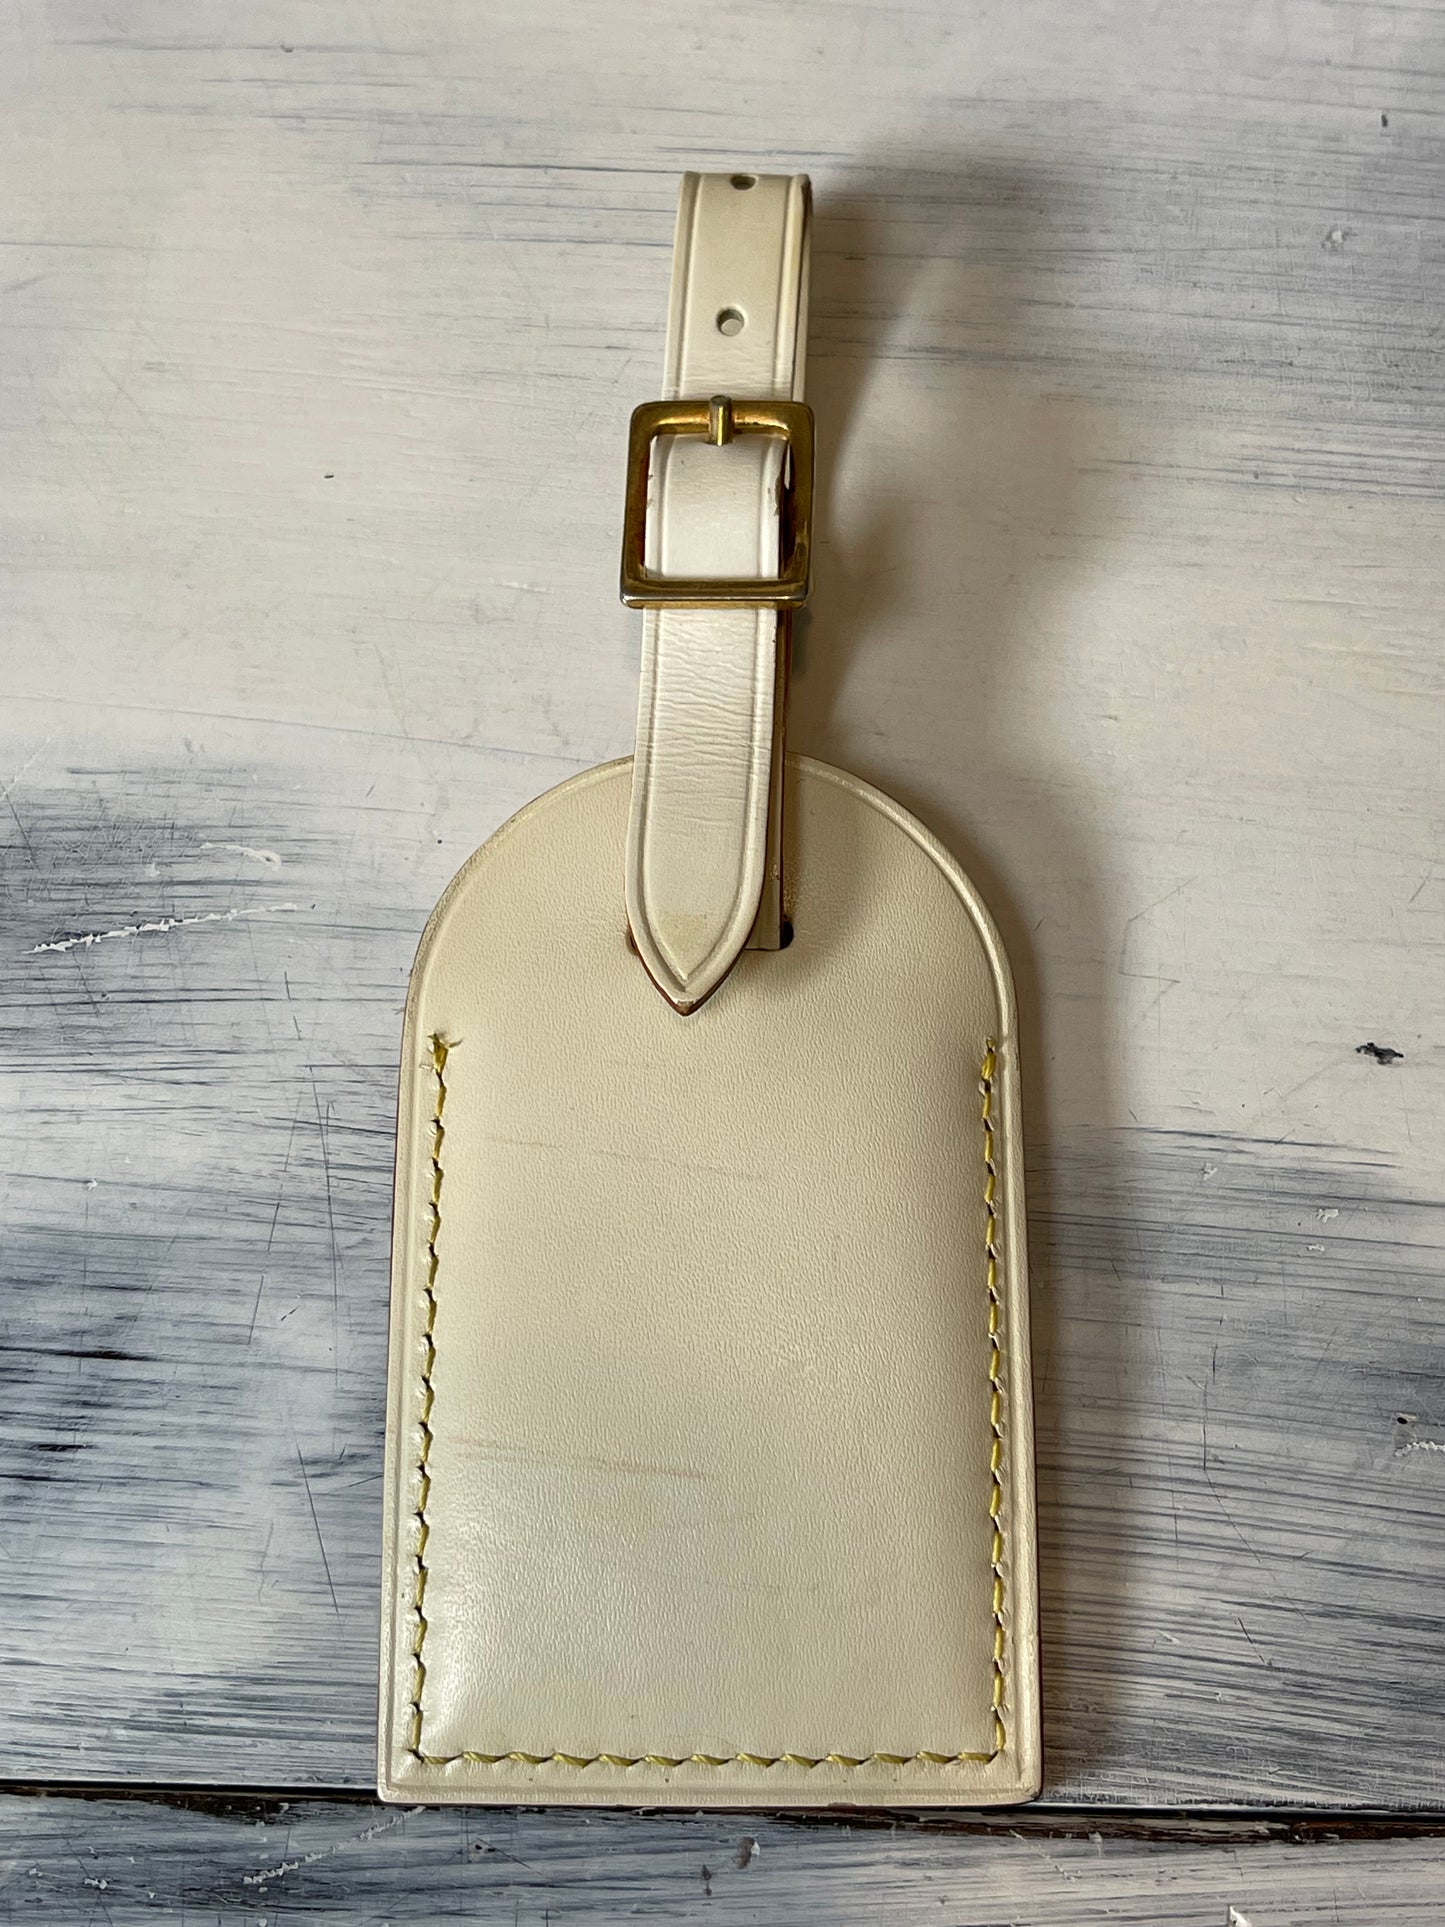 Louis Vuitton Luggage Tag Small